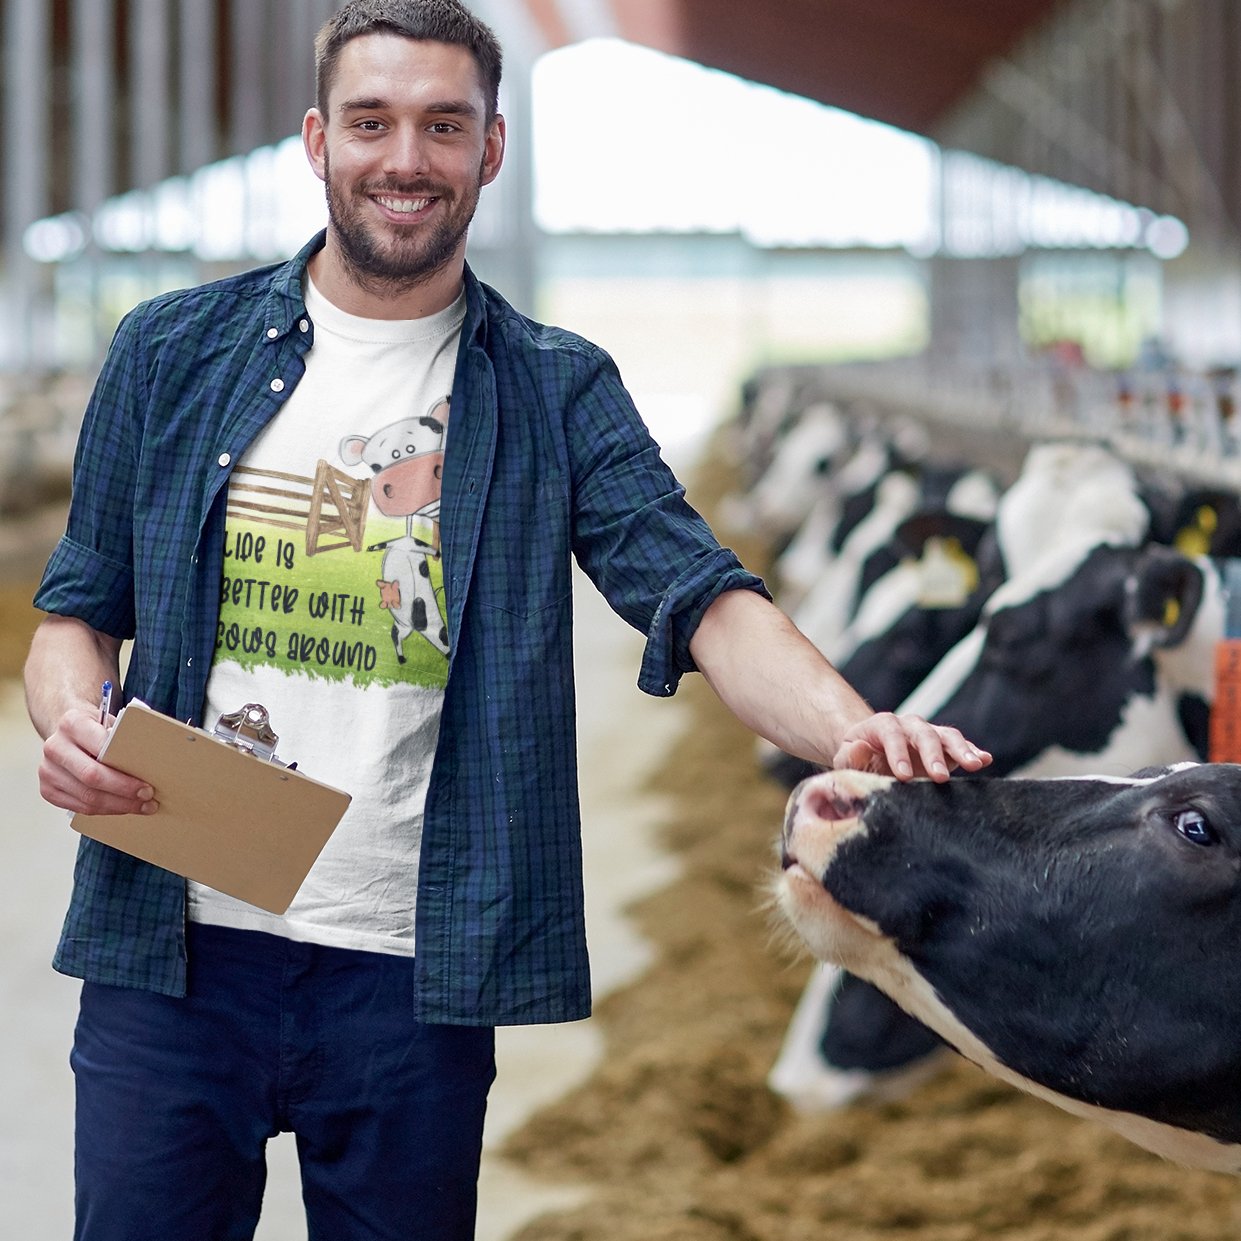 Bovine Bliss: 'Life is Better with Cows' T-shirt – Where Moo-dern Living Meets Stylish Serenity!